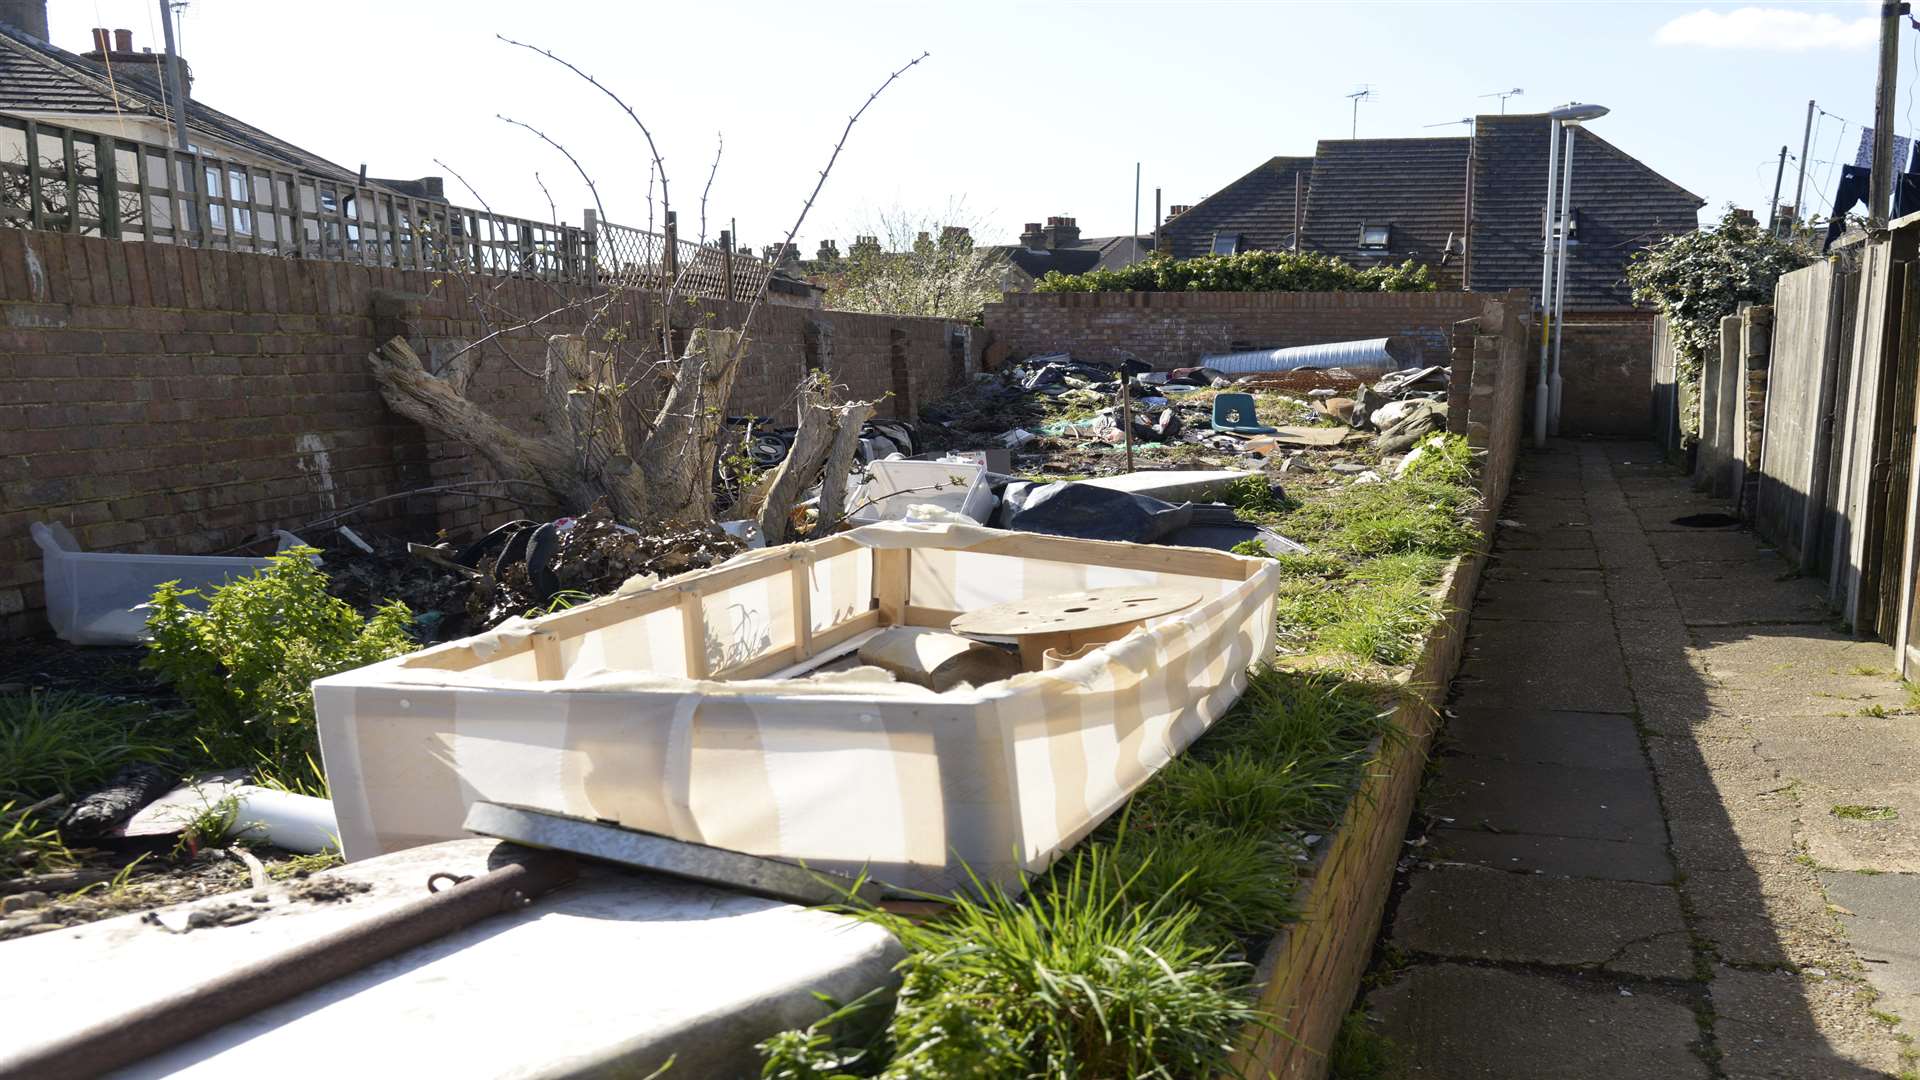 Residents are angry about the repeated flytipping. Picture: Chris Davey